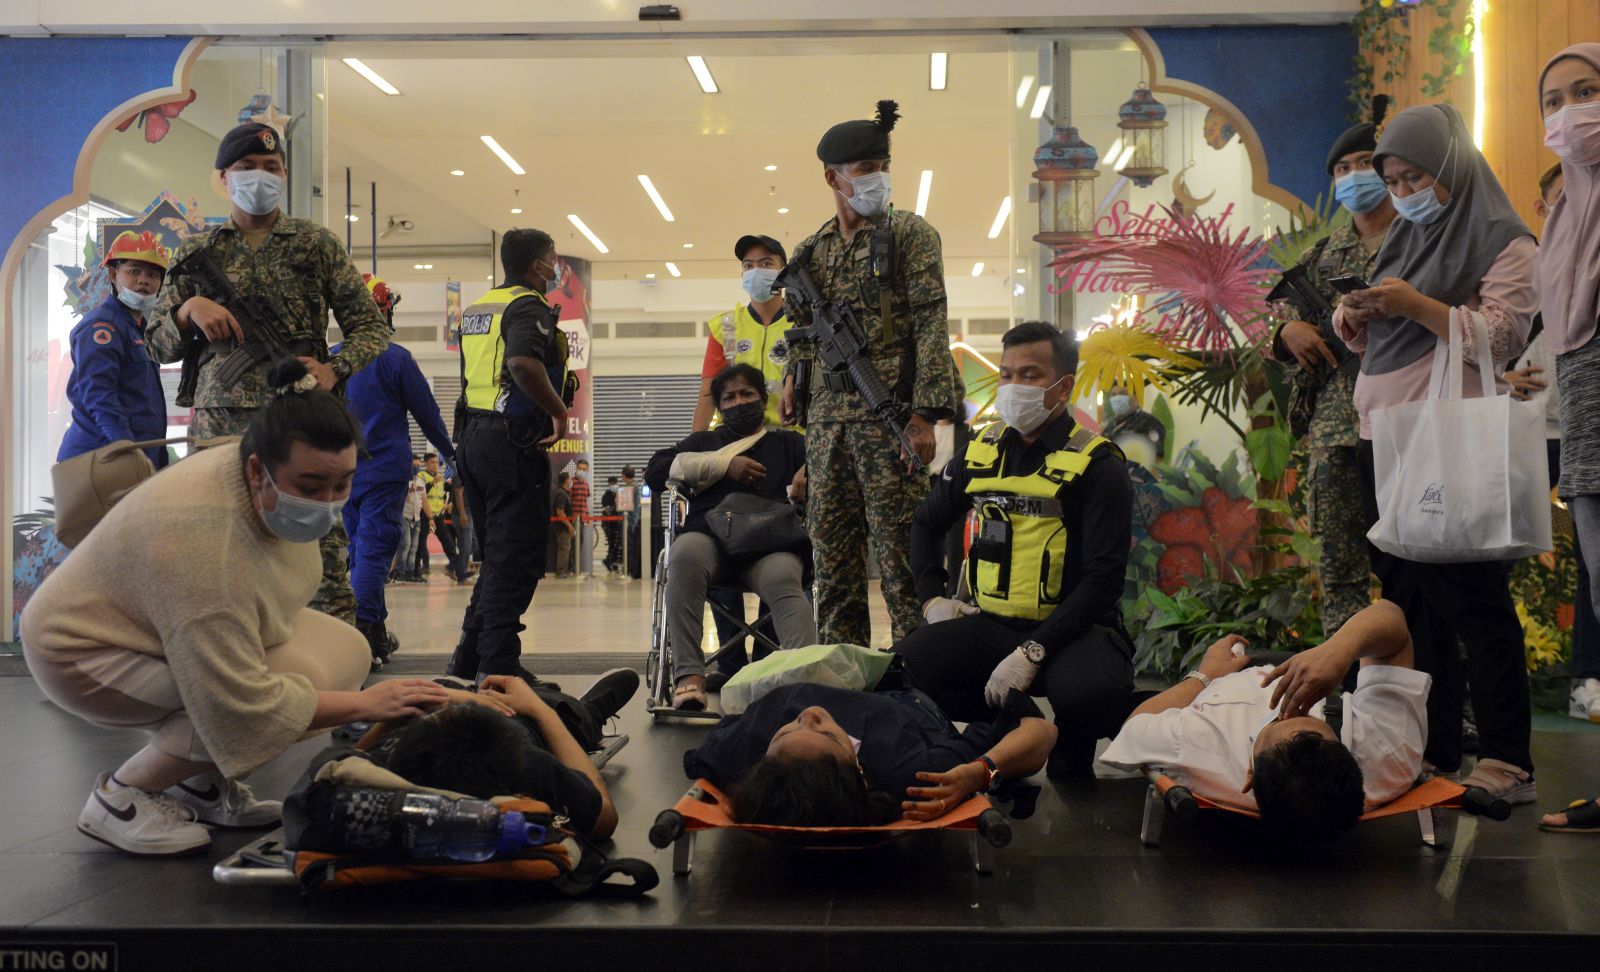 epa09225538 Rescue personnel help injured passengers at KLCC station after an accident involving Kuala Lumpur Light Rail Transit (LRT) trains in Kuala Lumpur, Malaysia, 24 May 2021. More than 230 people were injured after two LRT trains collided in a tunnel in Kuala Lumpur.  EPA/STR MALAYSIA OUT